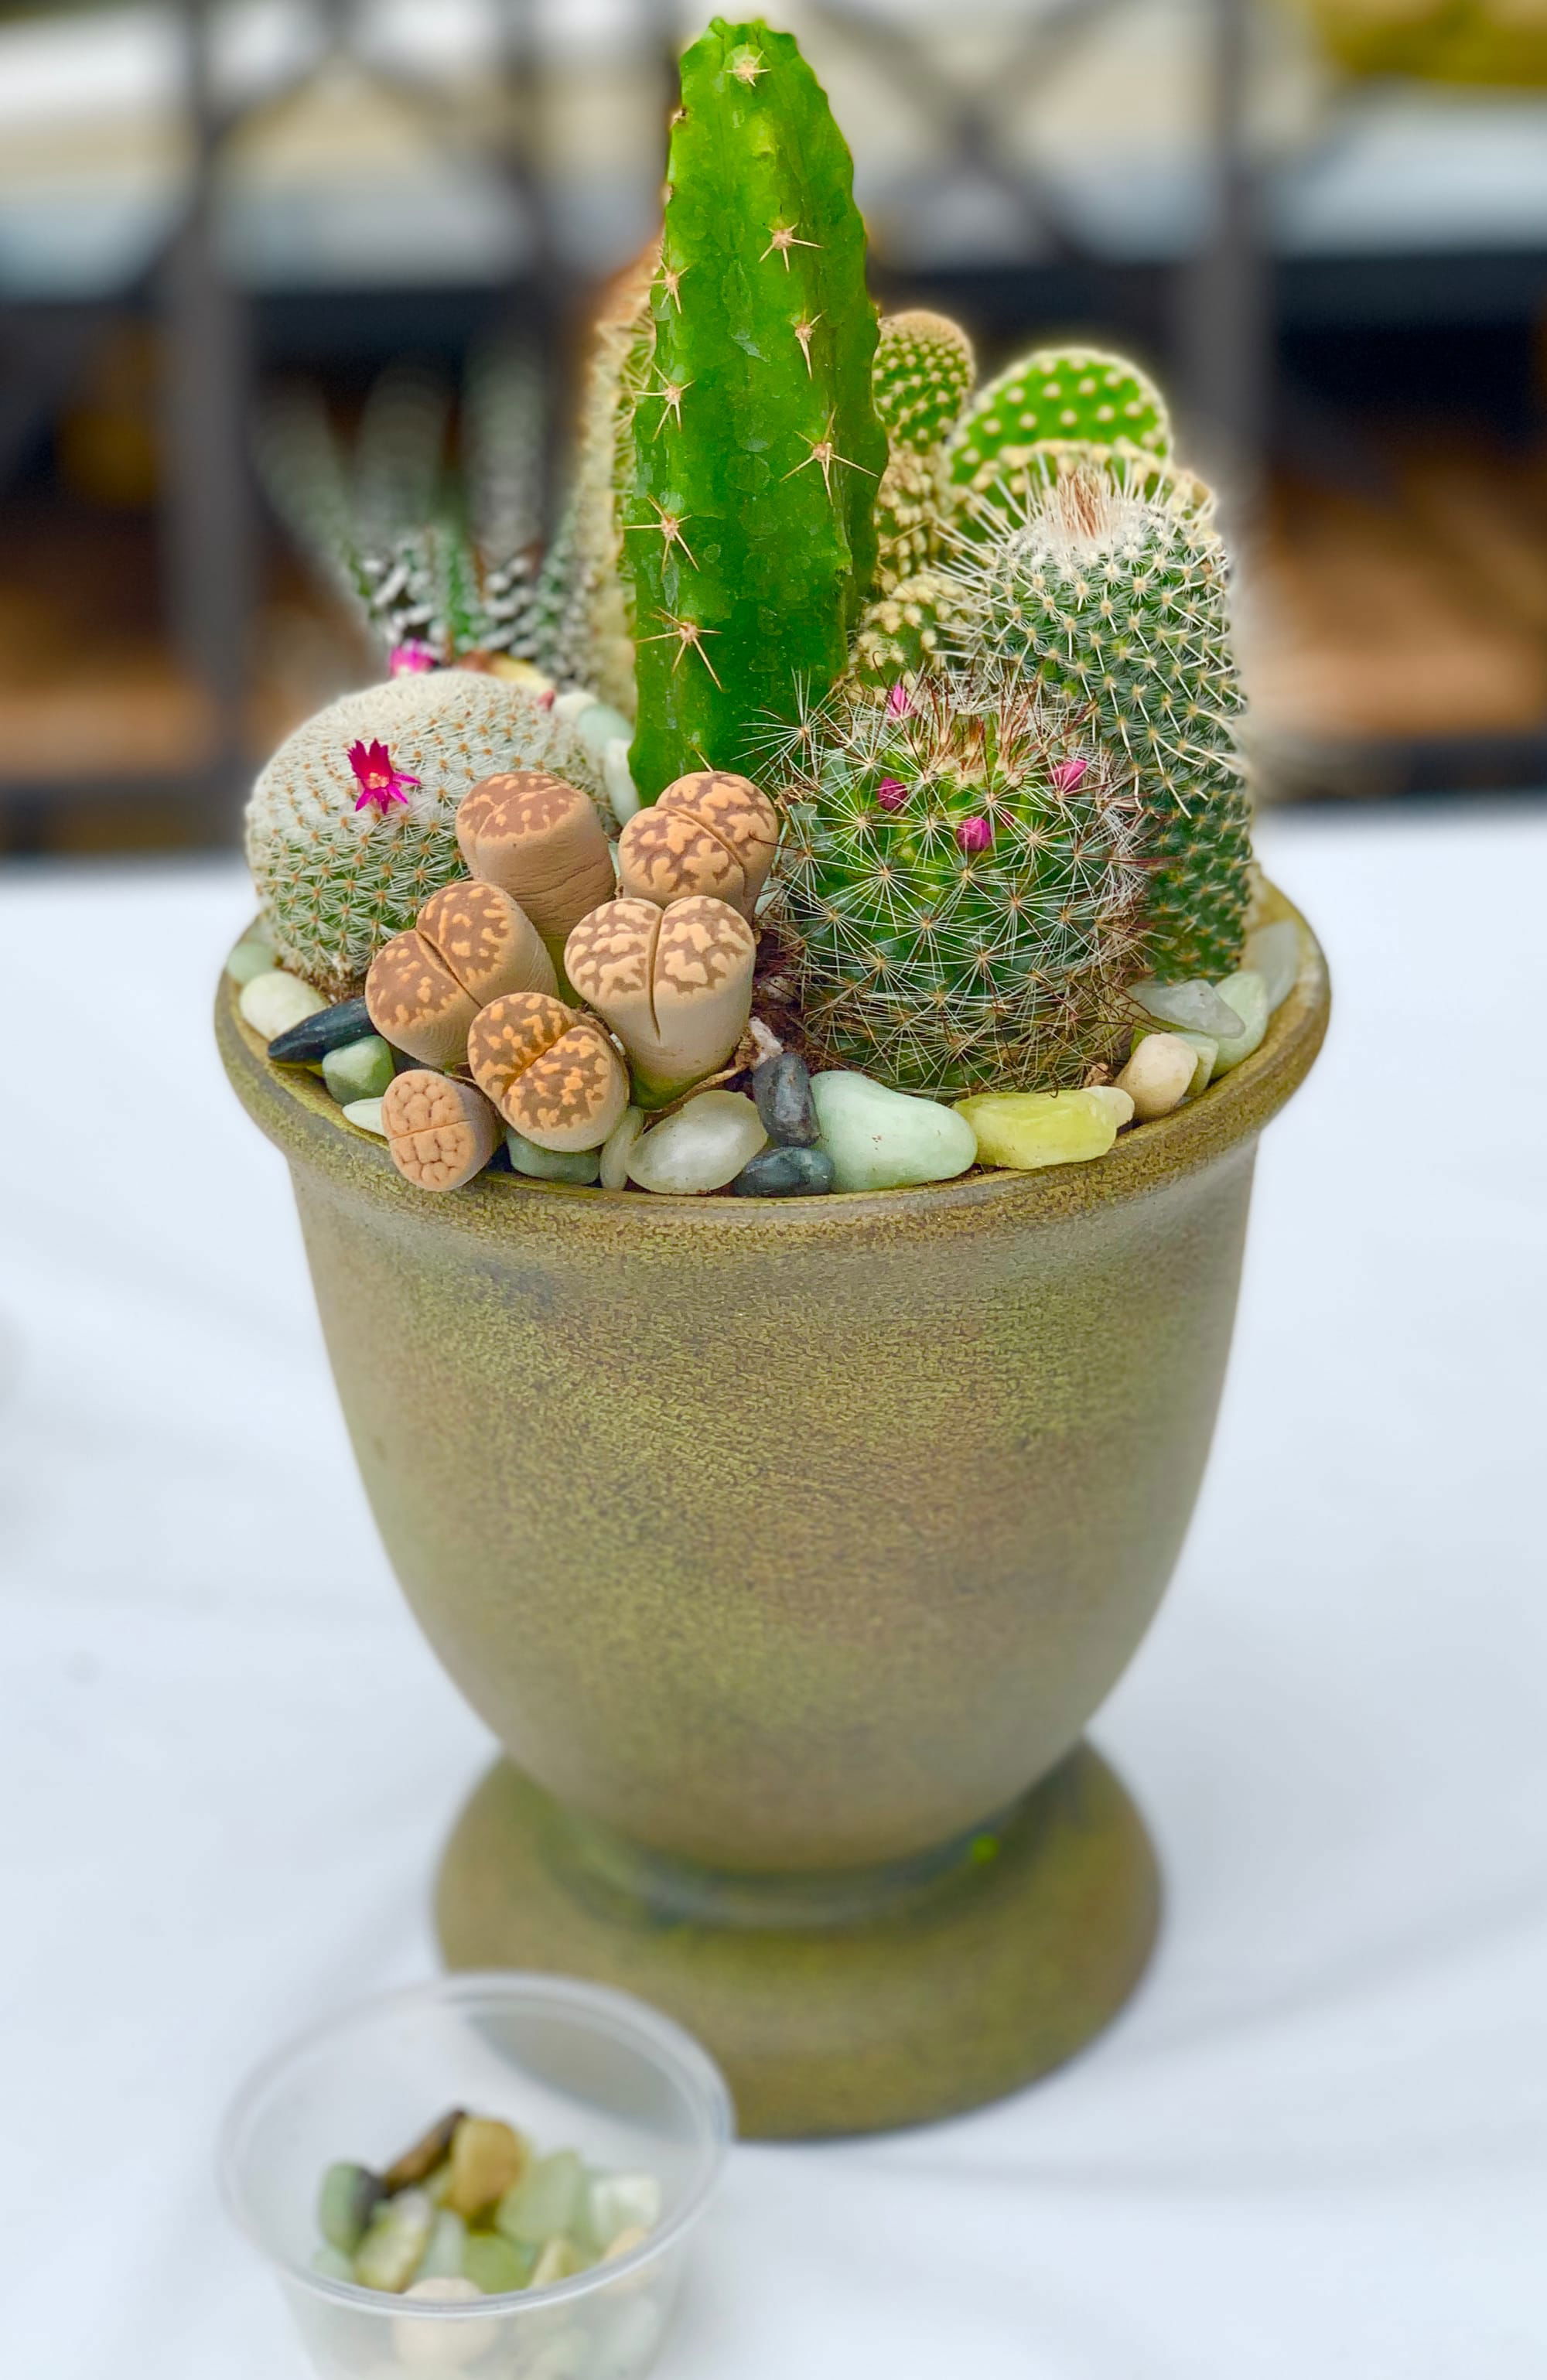 Cactus Pot Class - available either as a kit to plant at home or a private in-store class (with pizza party option) or you can purchase pre-planted.  $75 - click on this pic then scroll down in the text section to see all the info